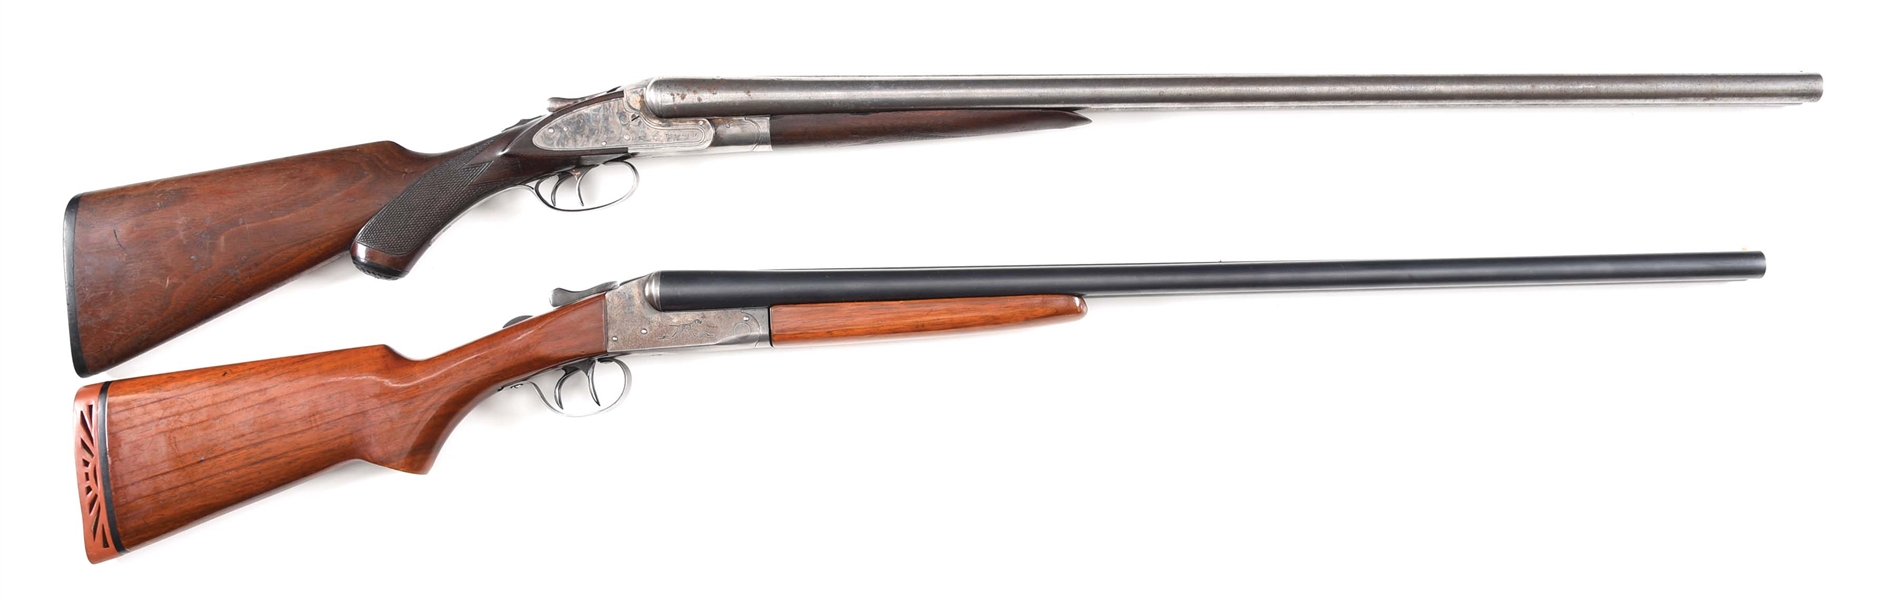 (M) LOT OF 2: A.J. AUBREY AND WESTERN ARMS SIDE BY SIDE SHOTGUNS.